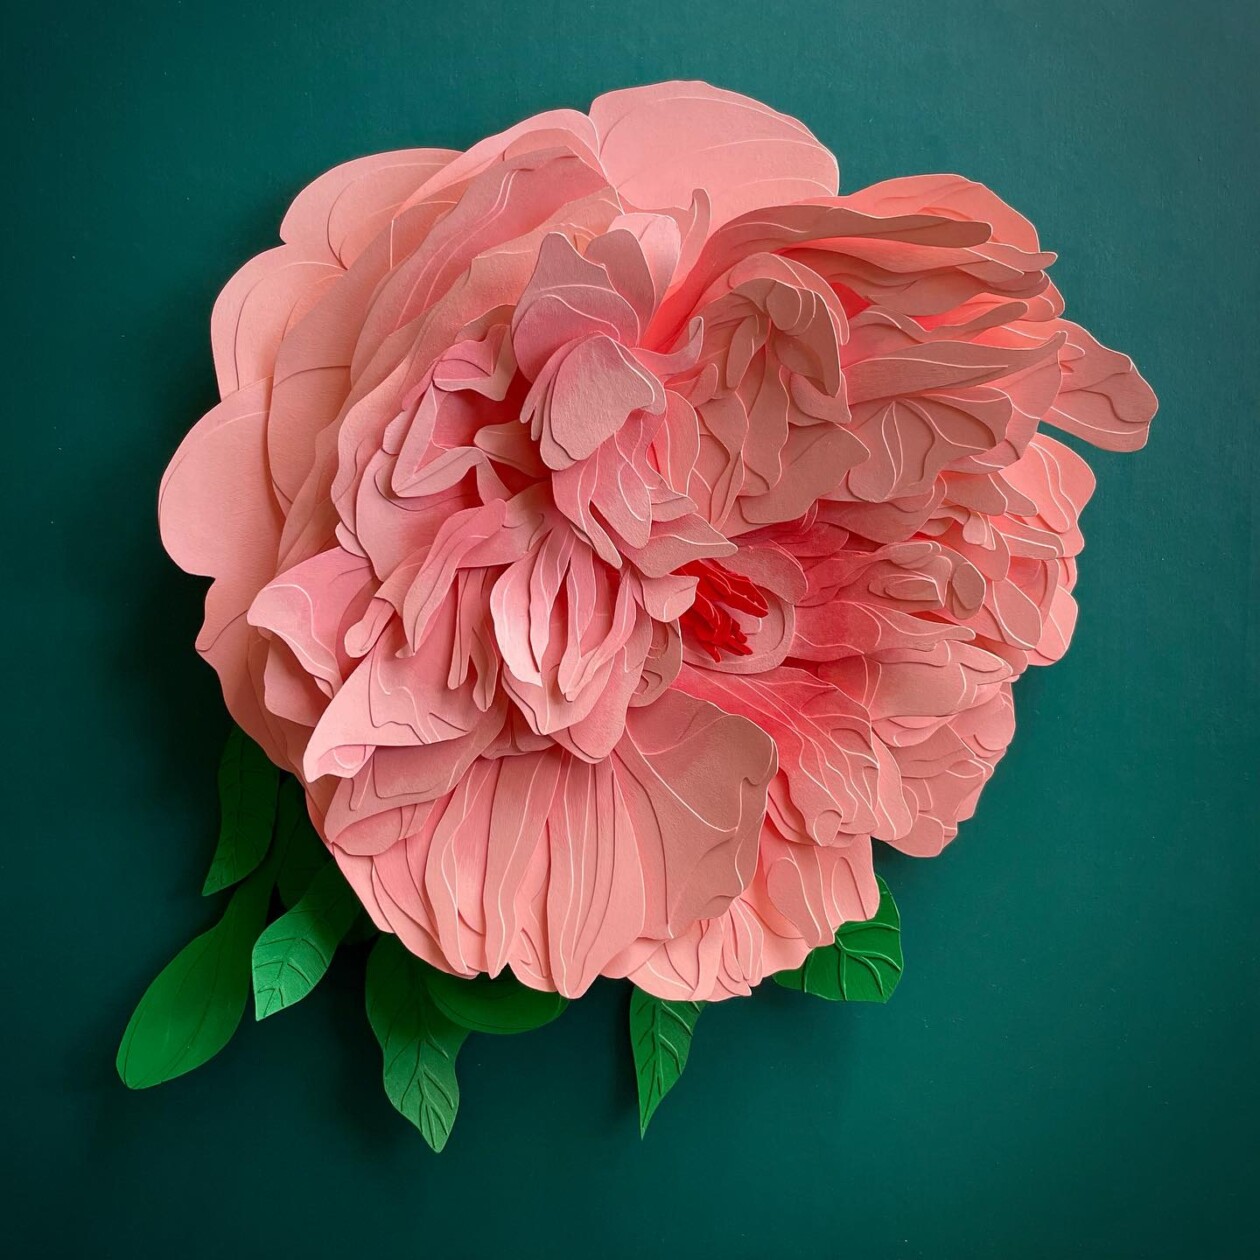 Gorgeously Intricate Floral Paper Cutting Sculptures By Joey Bates (18)